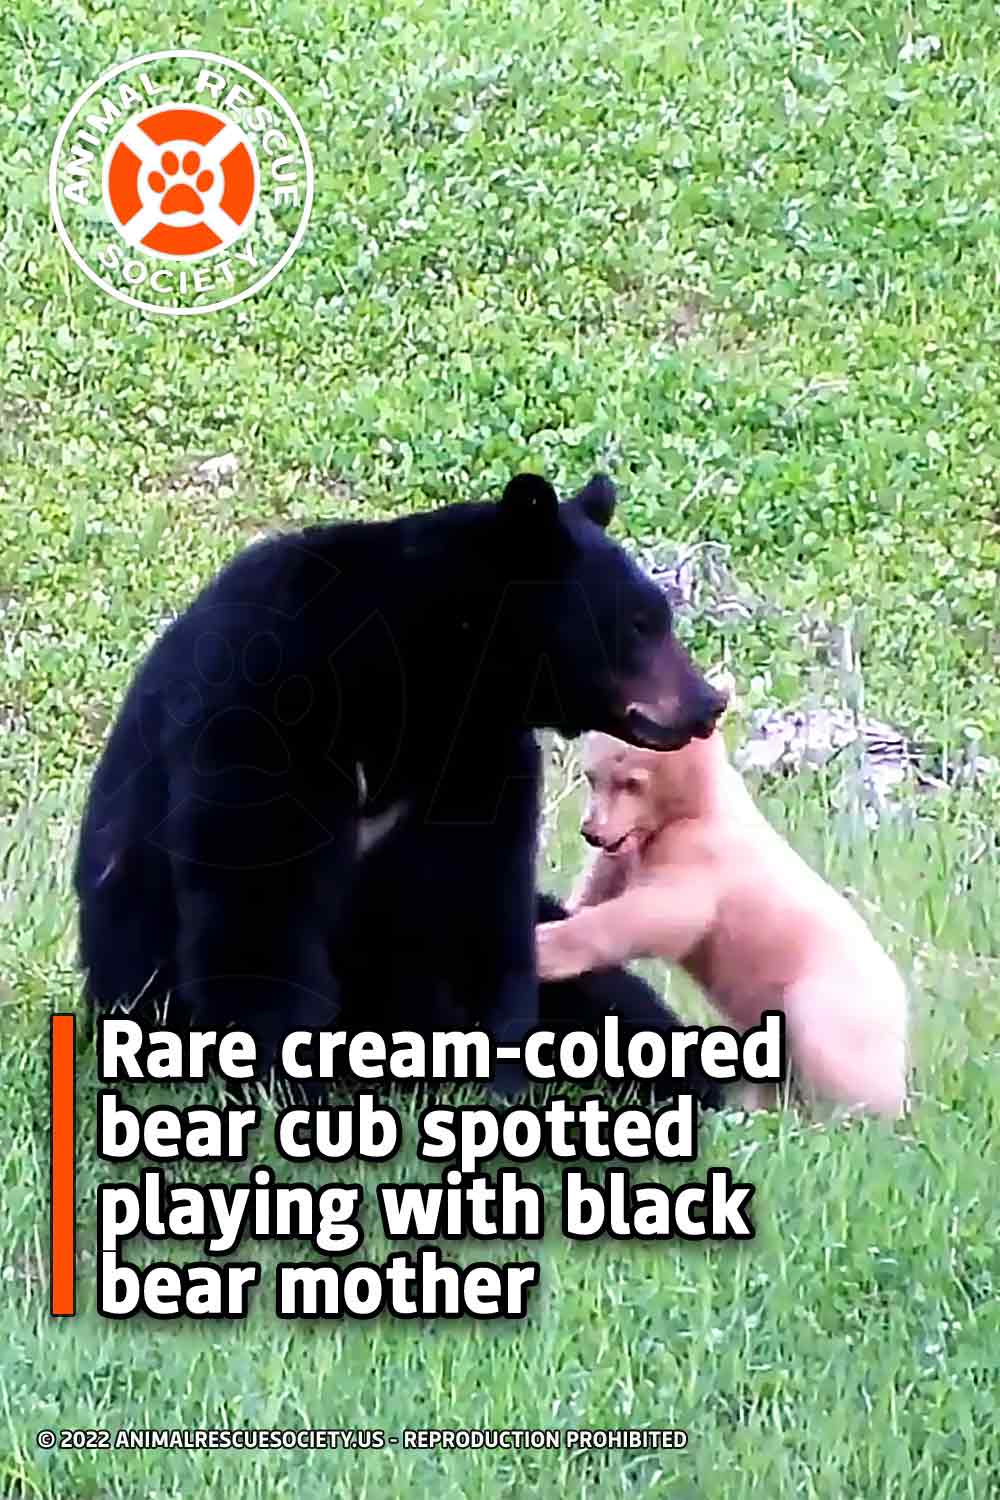 Rare cream-colored bear cub spotted playing with black bear mother